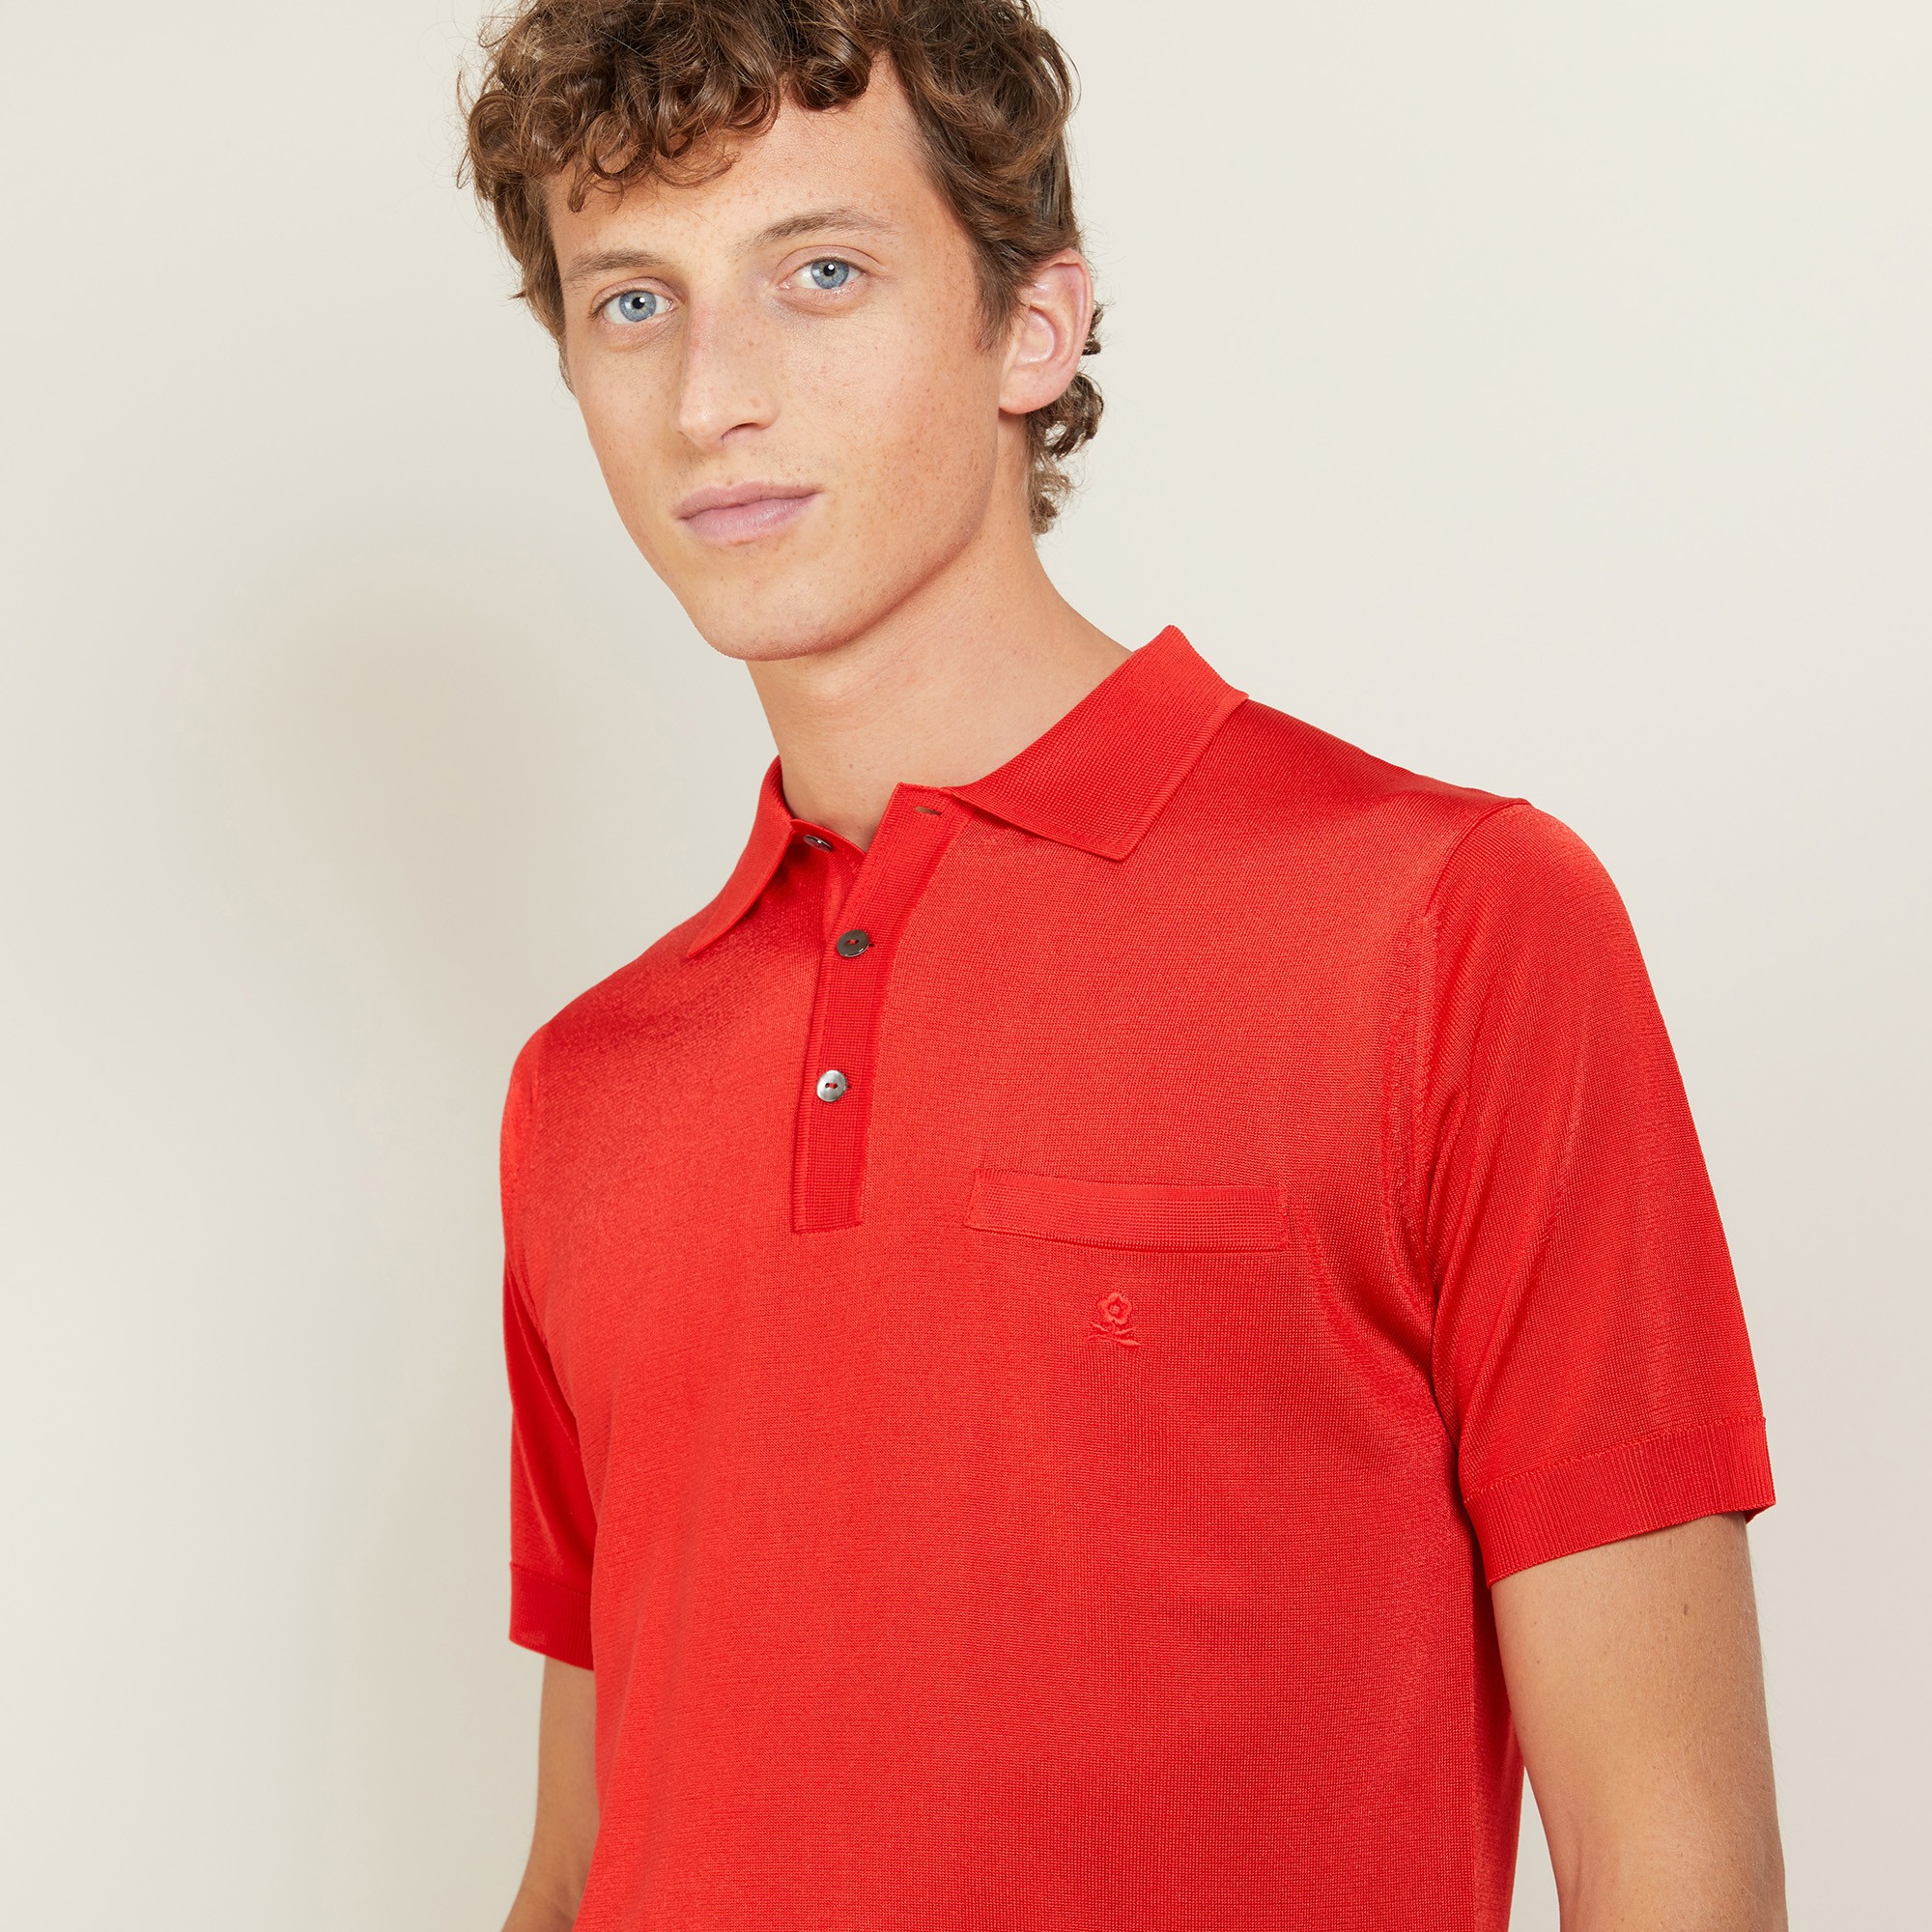 Man's polo of quality made of fil lumiere | Montagut Paris official website